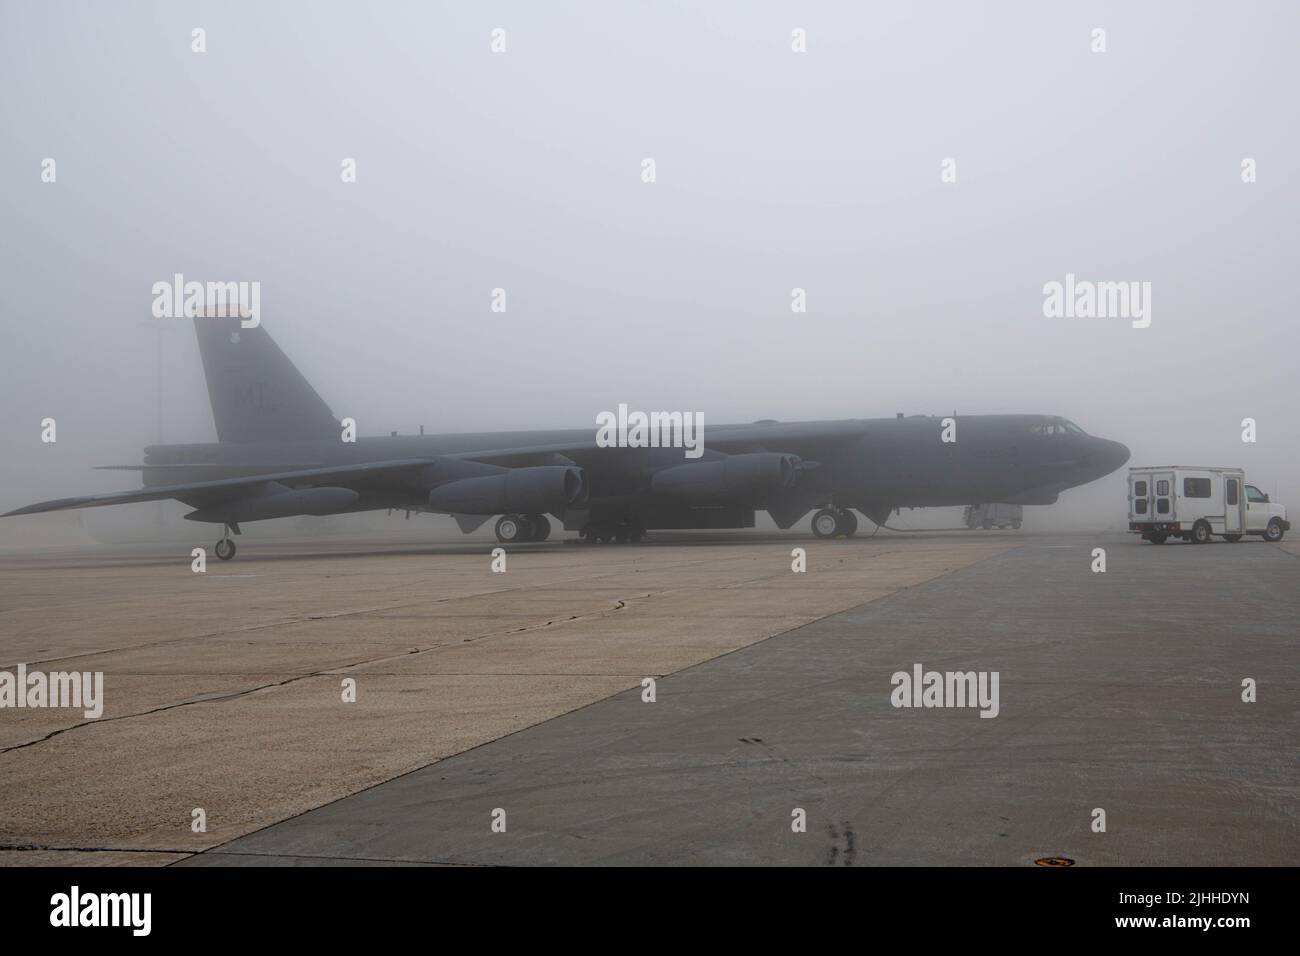 A B52H Stratofortress sits on a flight line preparing for flight at Minot Air Force Base, North Dakota, July 15, 2022. The B52H stands 45 feet tall, has a wingspan of 187 feet and the wings can flex up to 5 feet up up and down. (U.S. Air Force photo by Airman 1st class Alexander Nottingham) Stock Photo